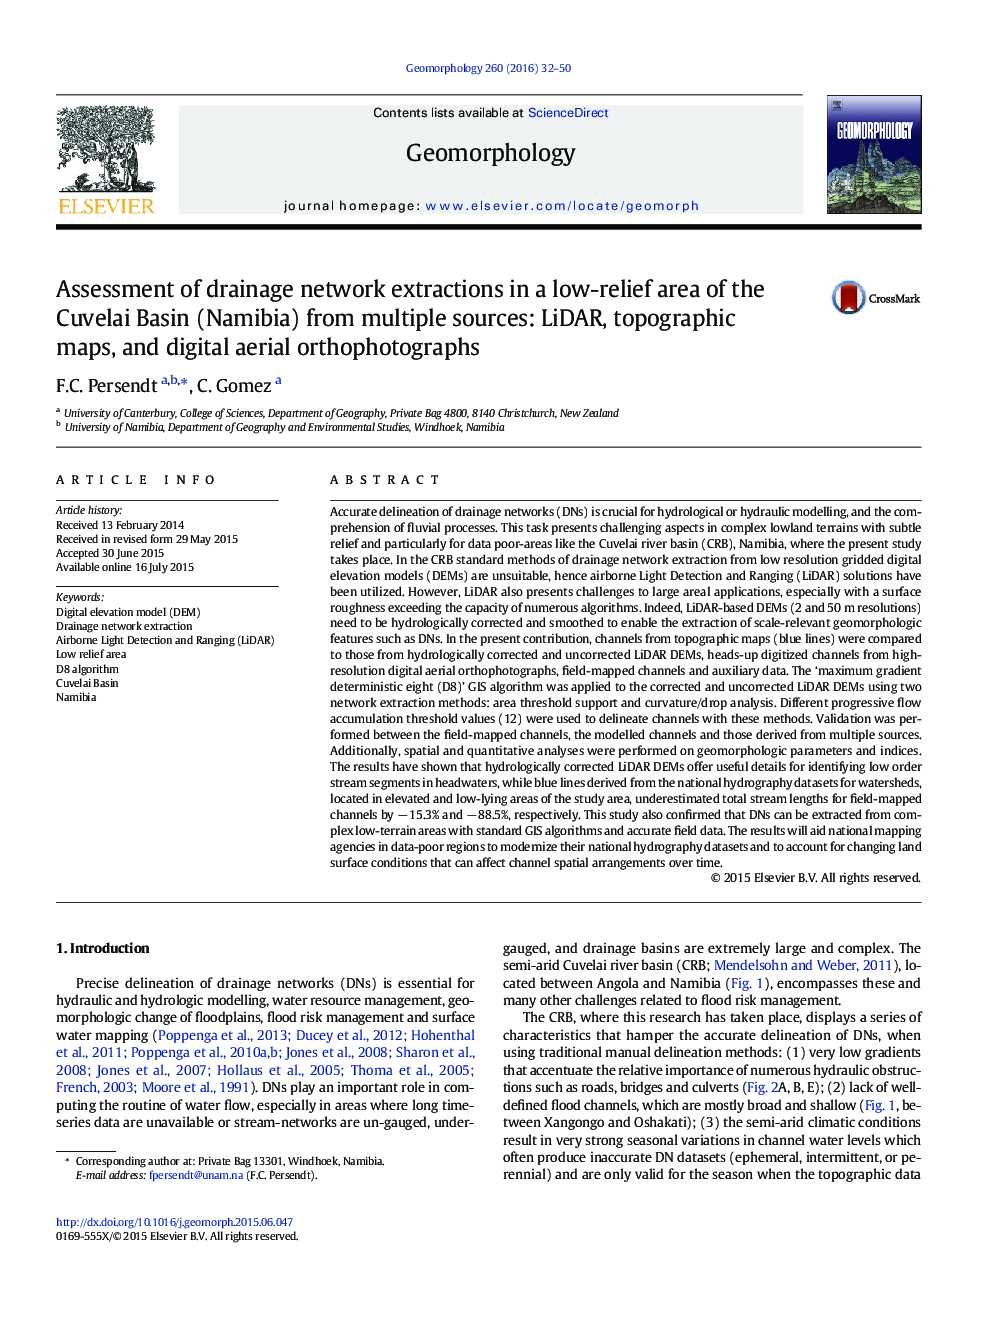 Assessment of drainage network extractions in a low-relief area of the Cuvelai Basin (Namibia) from multiple sources: LiDAR, topographic maps, and digital aerial orthophotographs